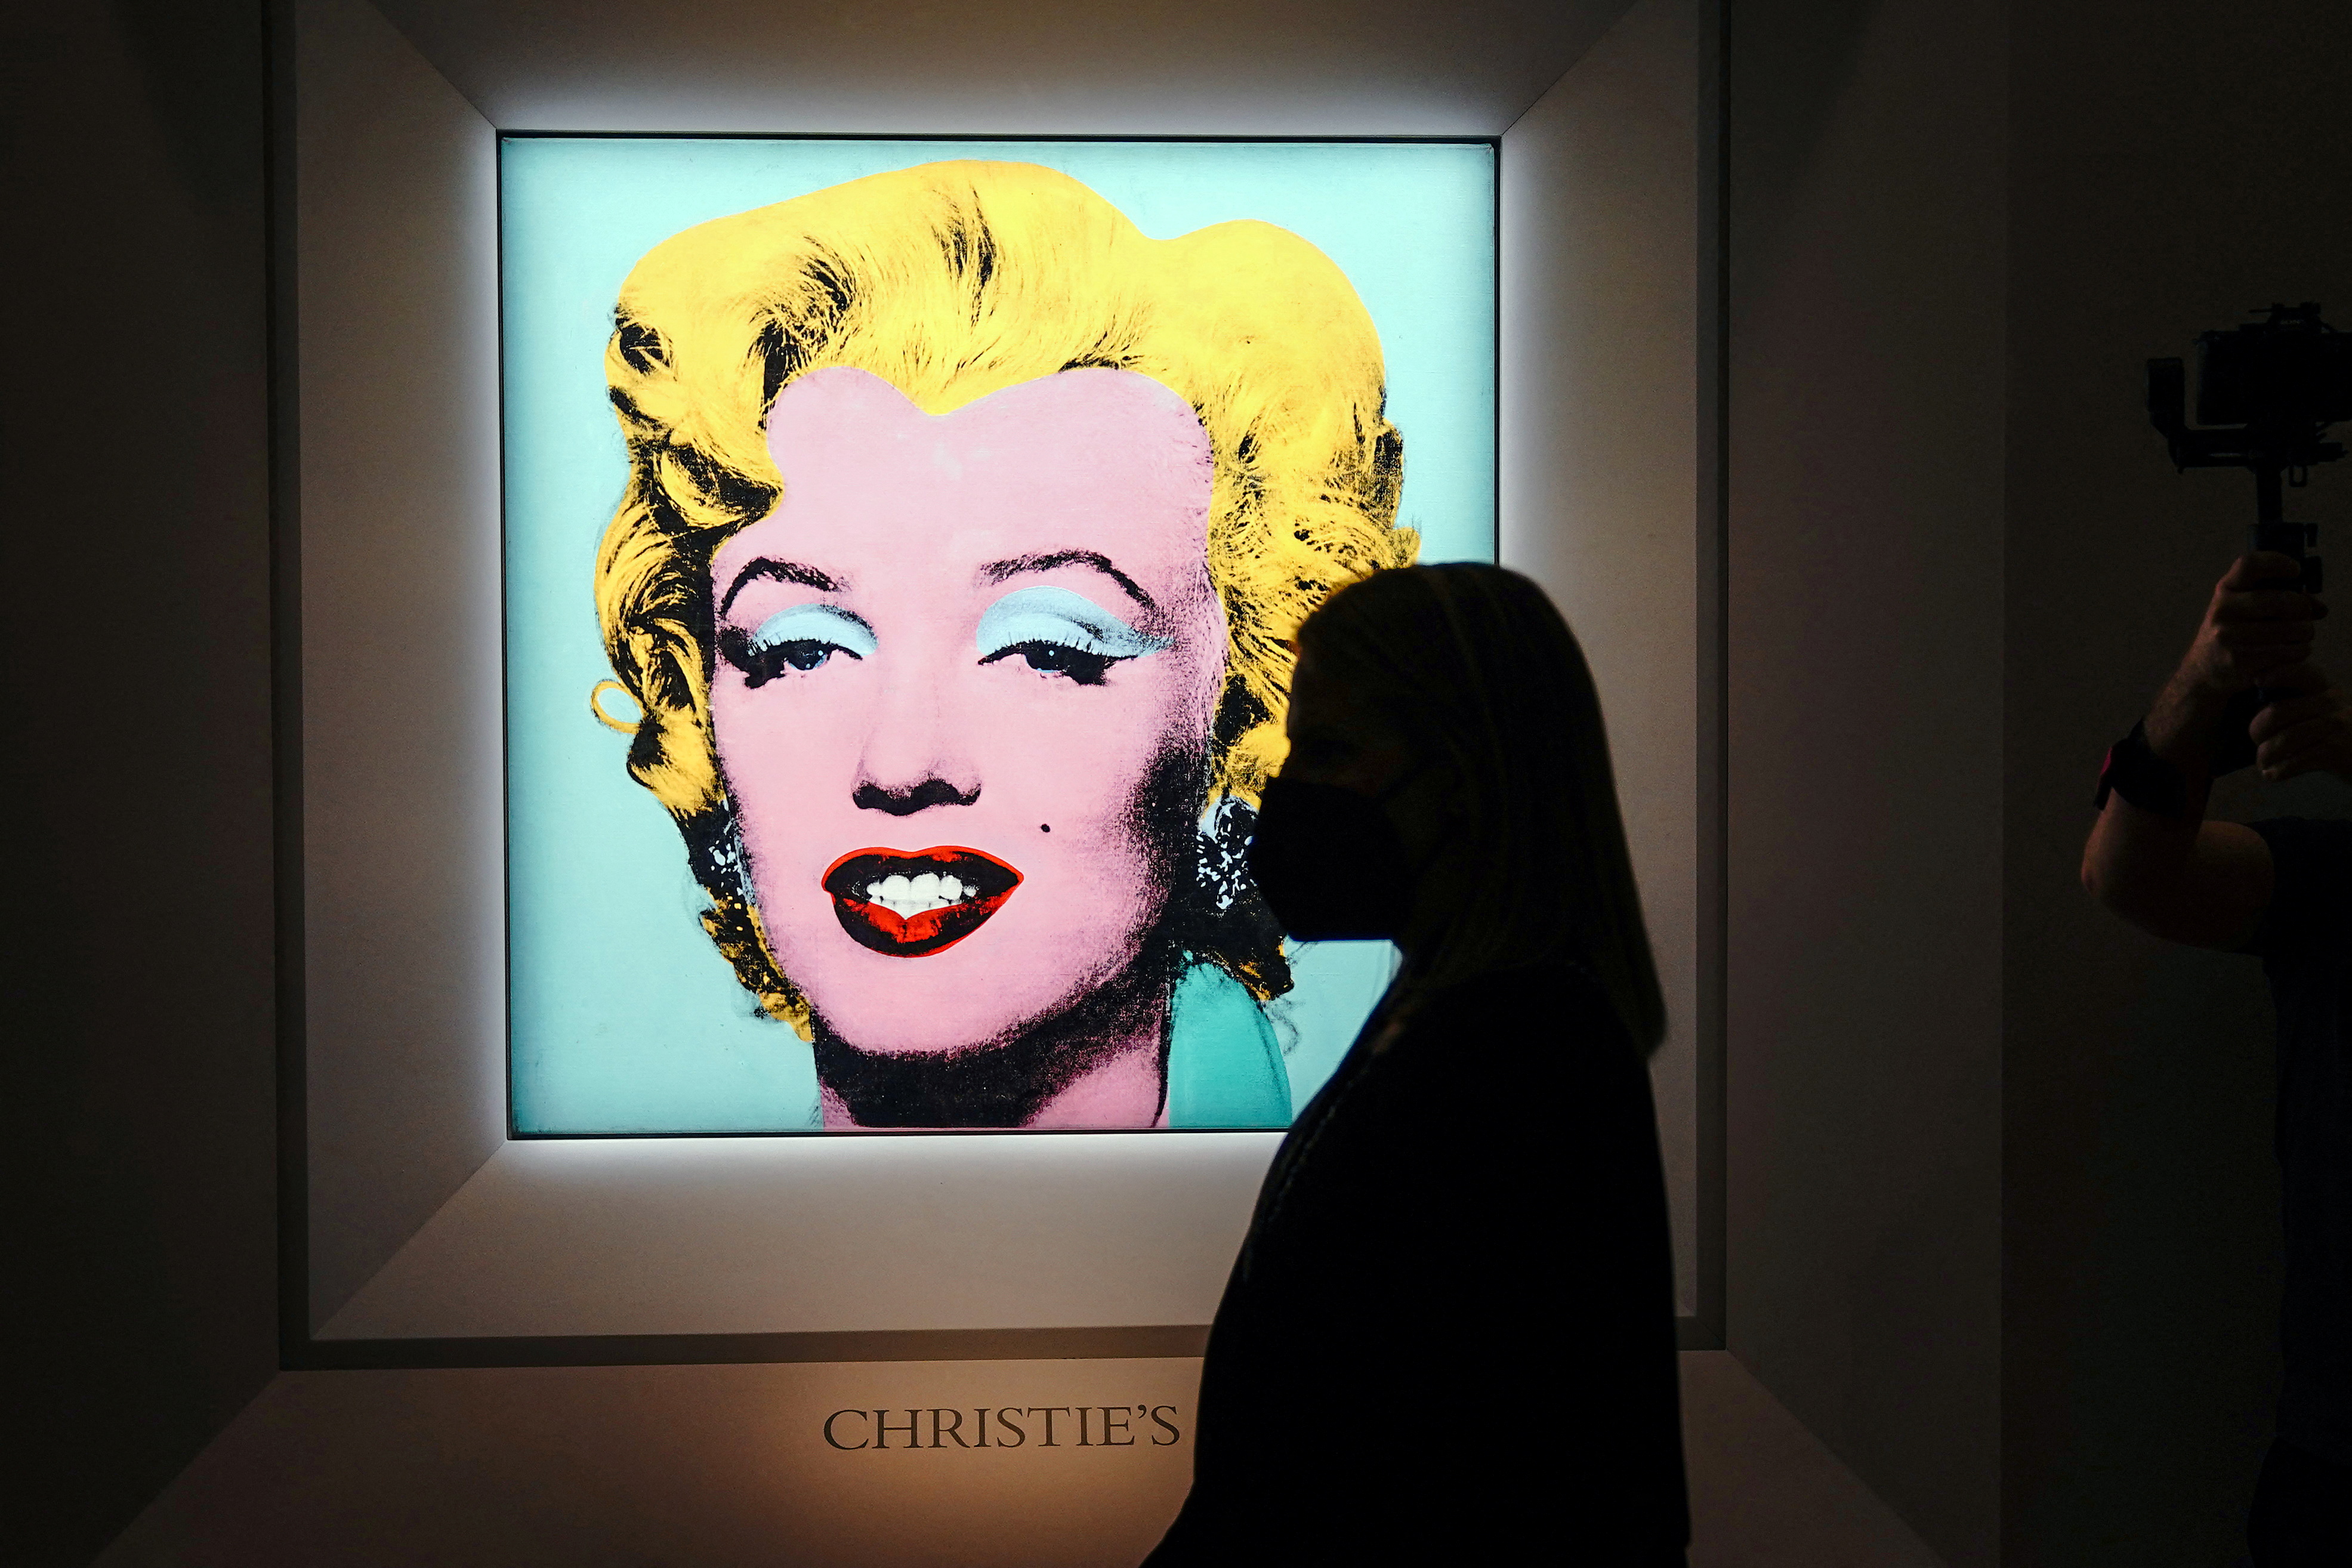 Andy Warhol auction in New York City